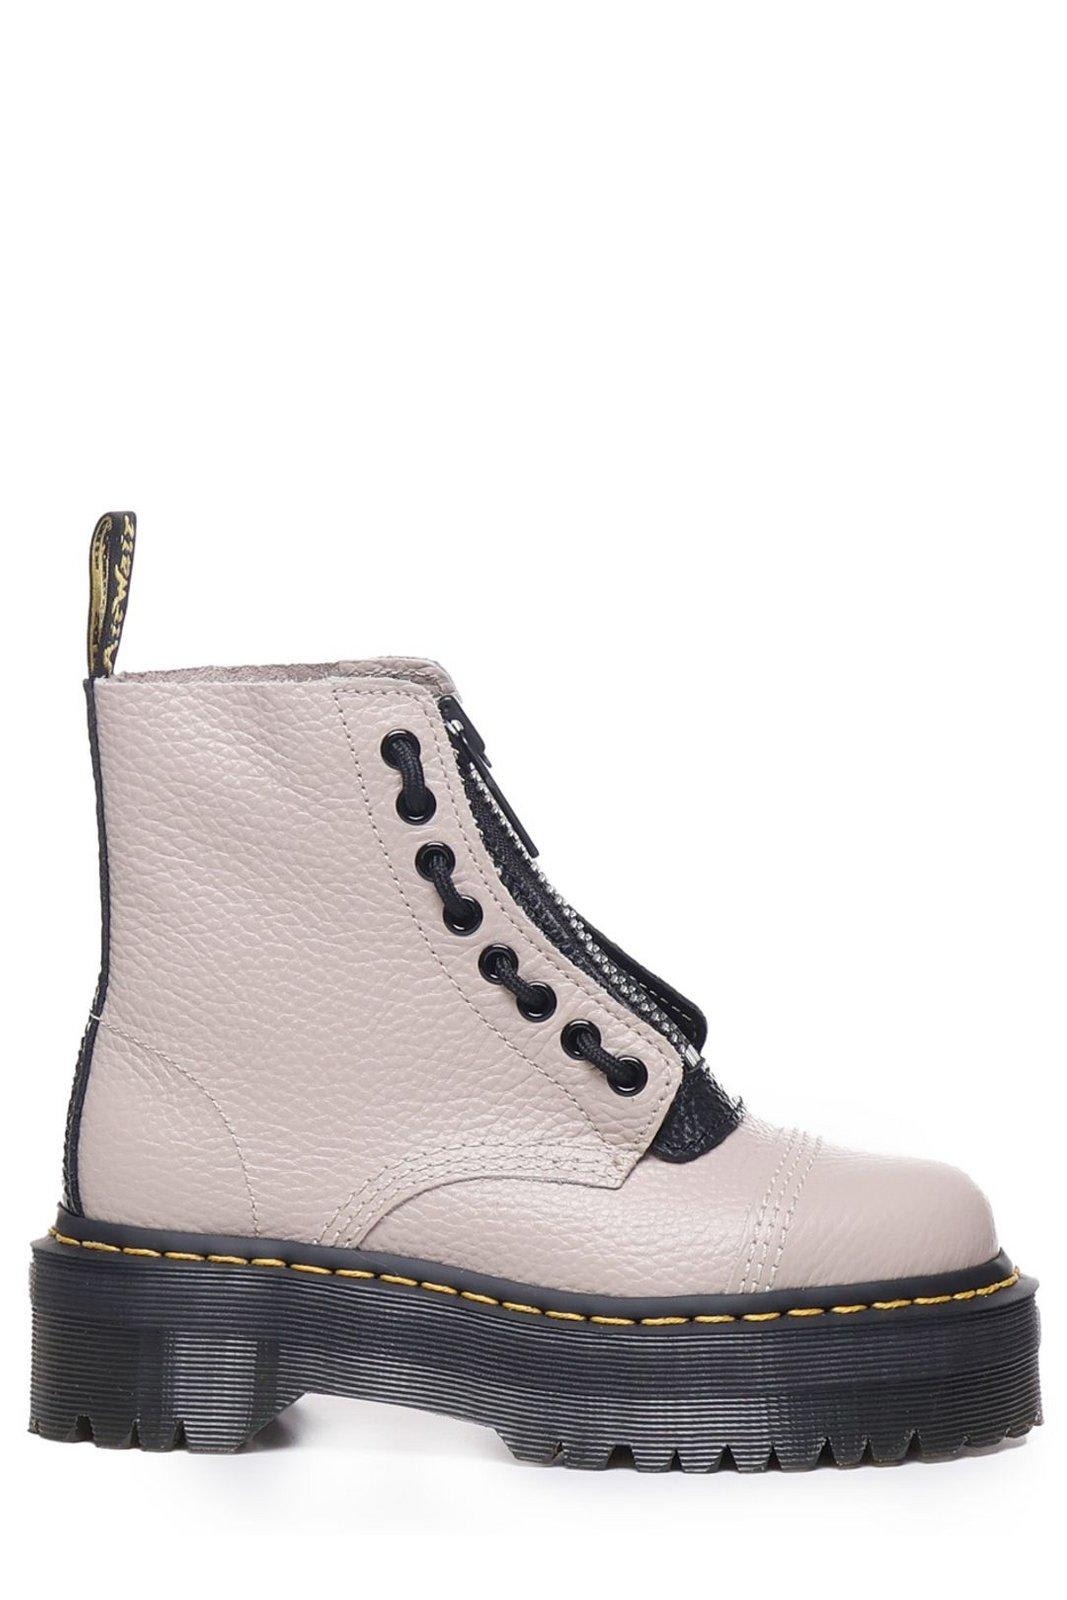 Dr. Martens Sinclair Combat Boots In Taupe Leather